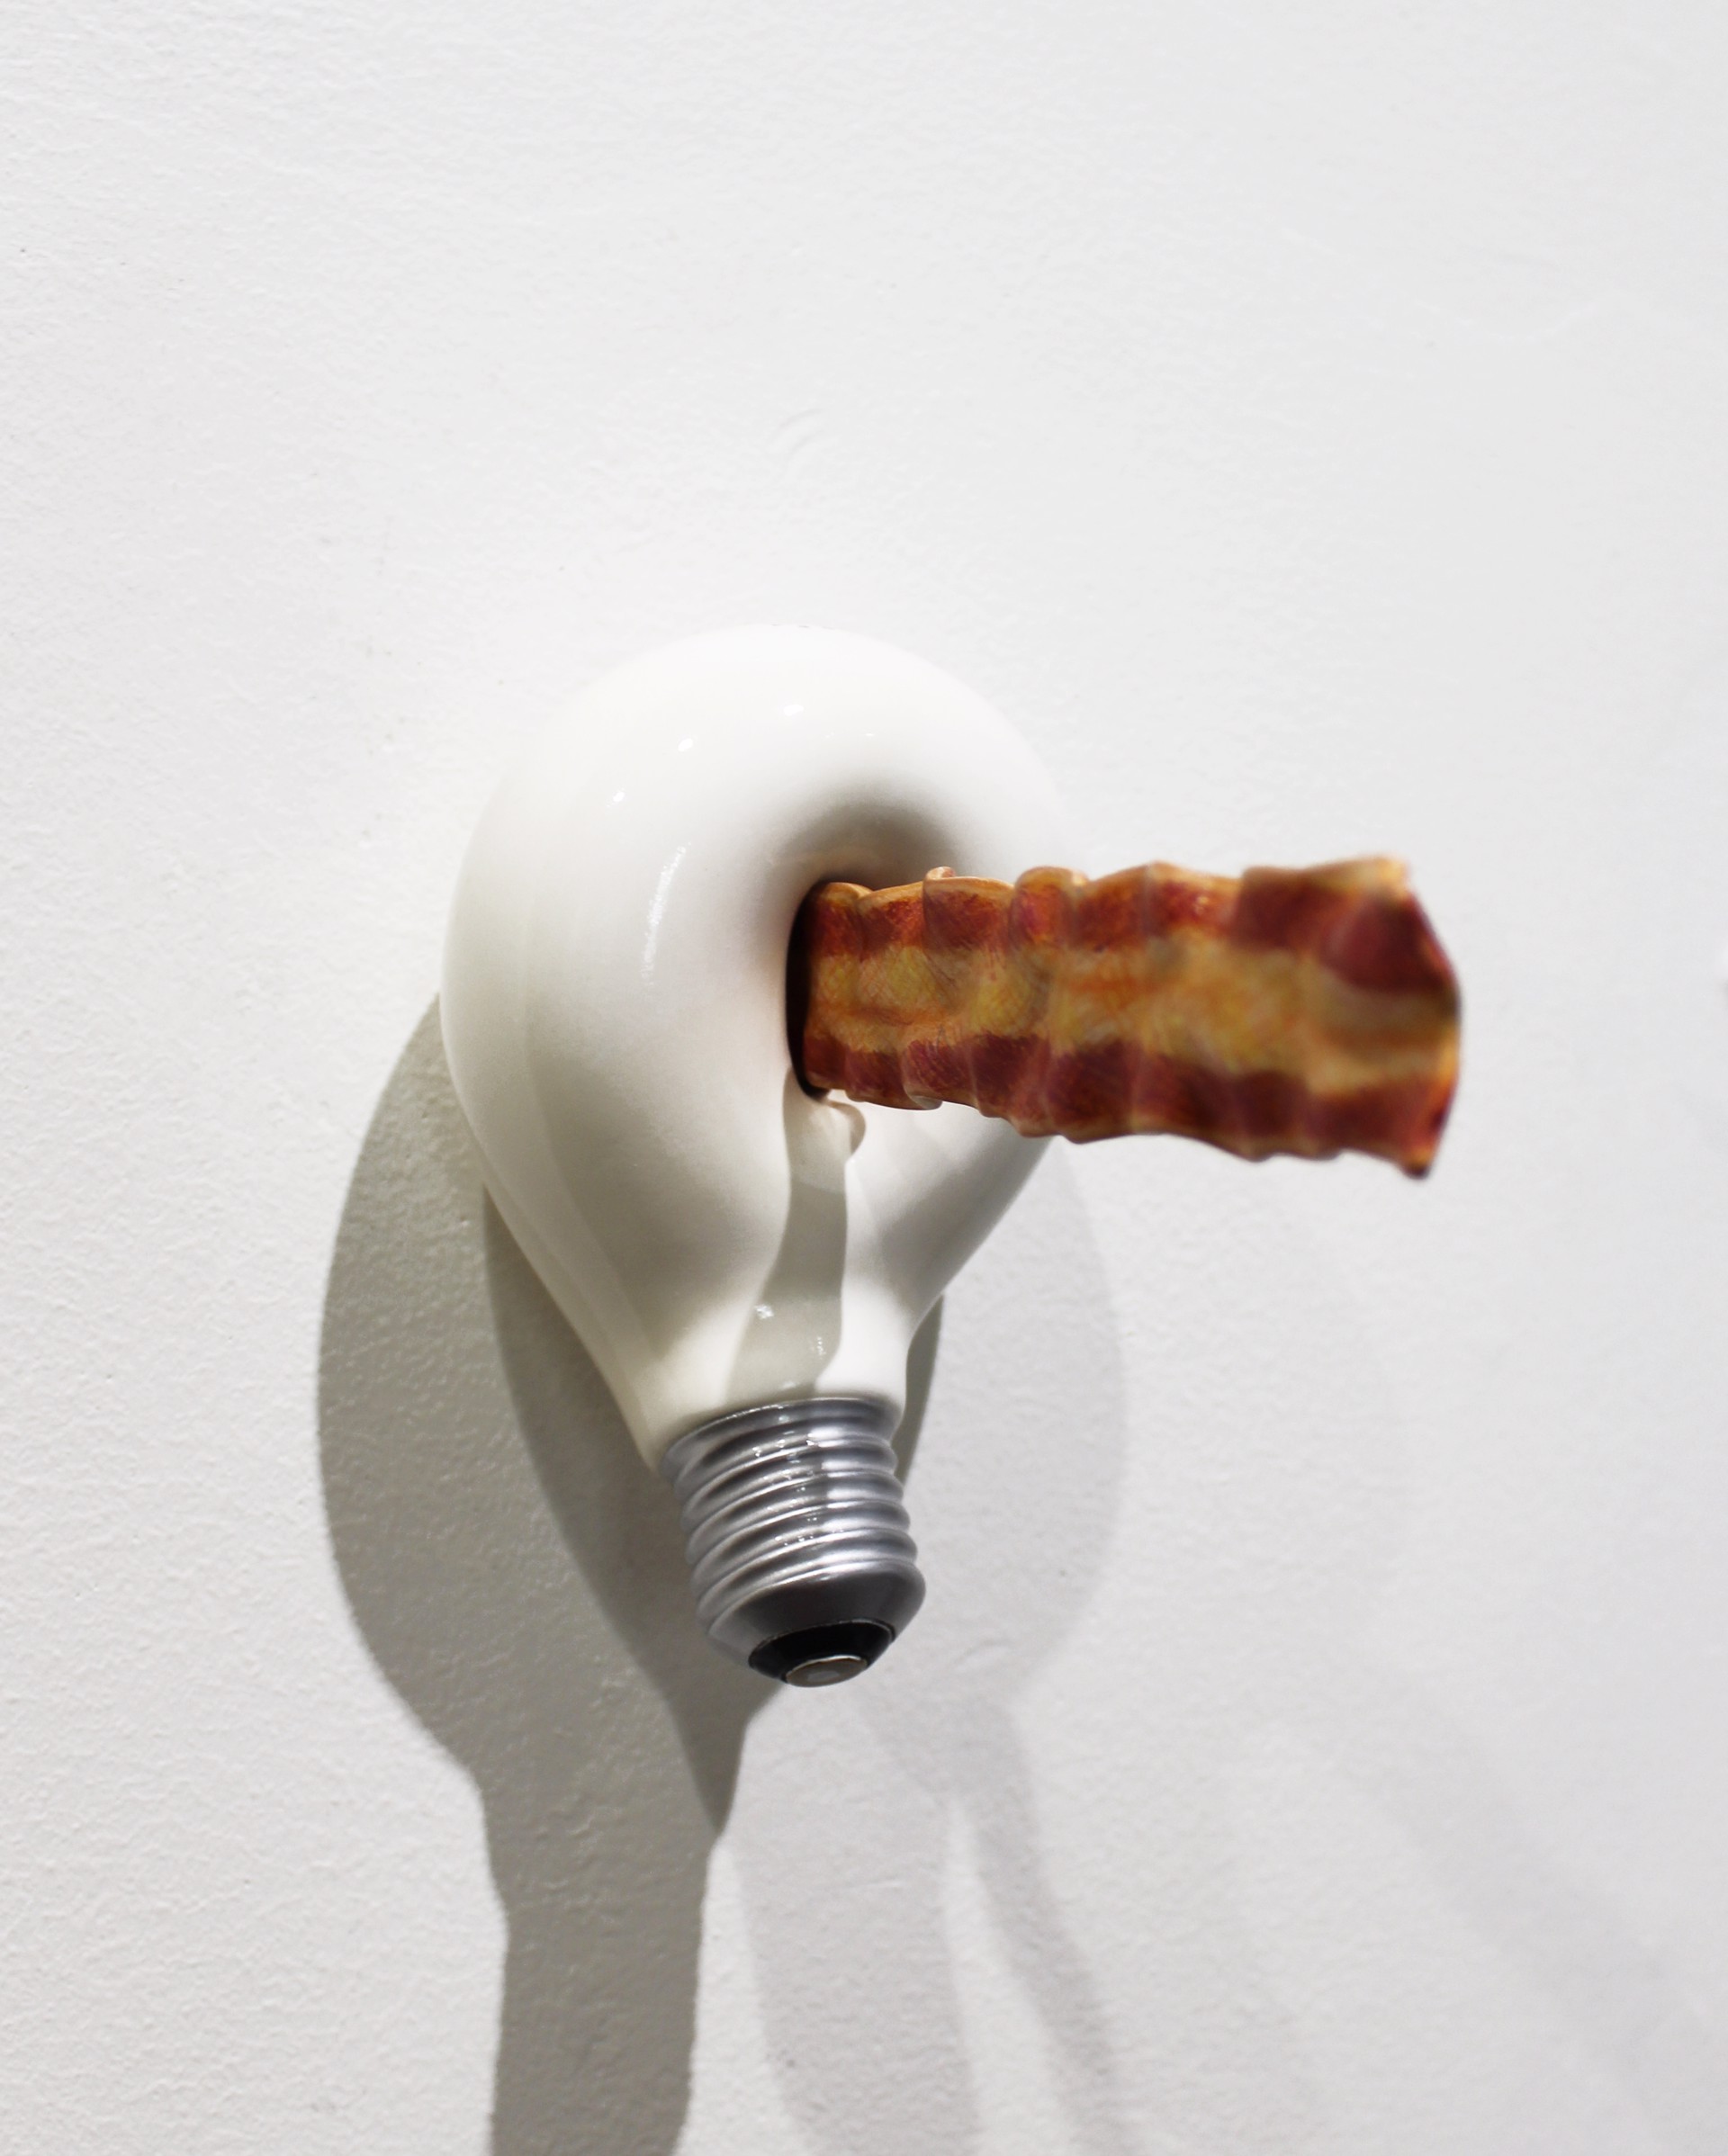 Brite Idea: Light Where You Need It (Bacon) by Sean O'Meallie